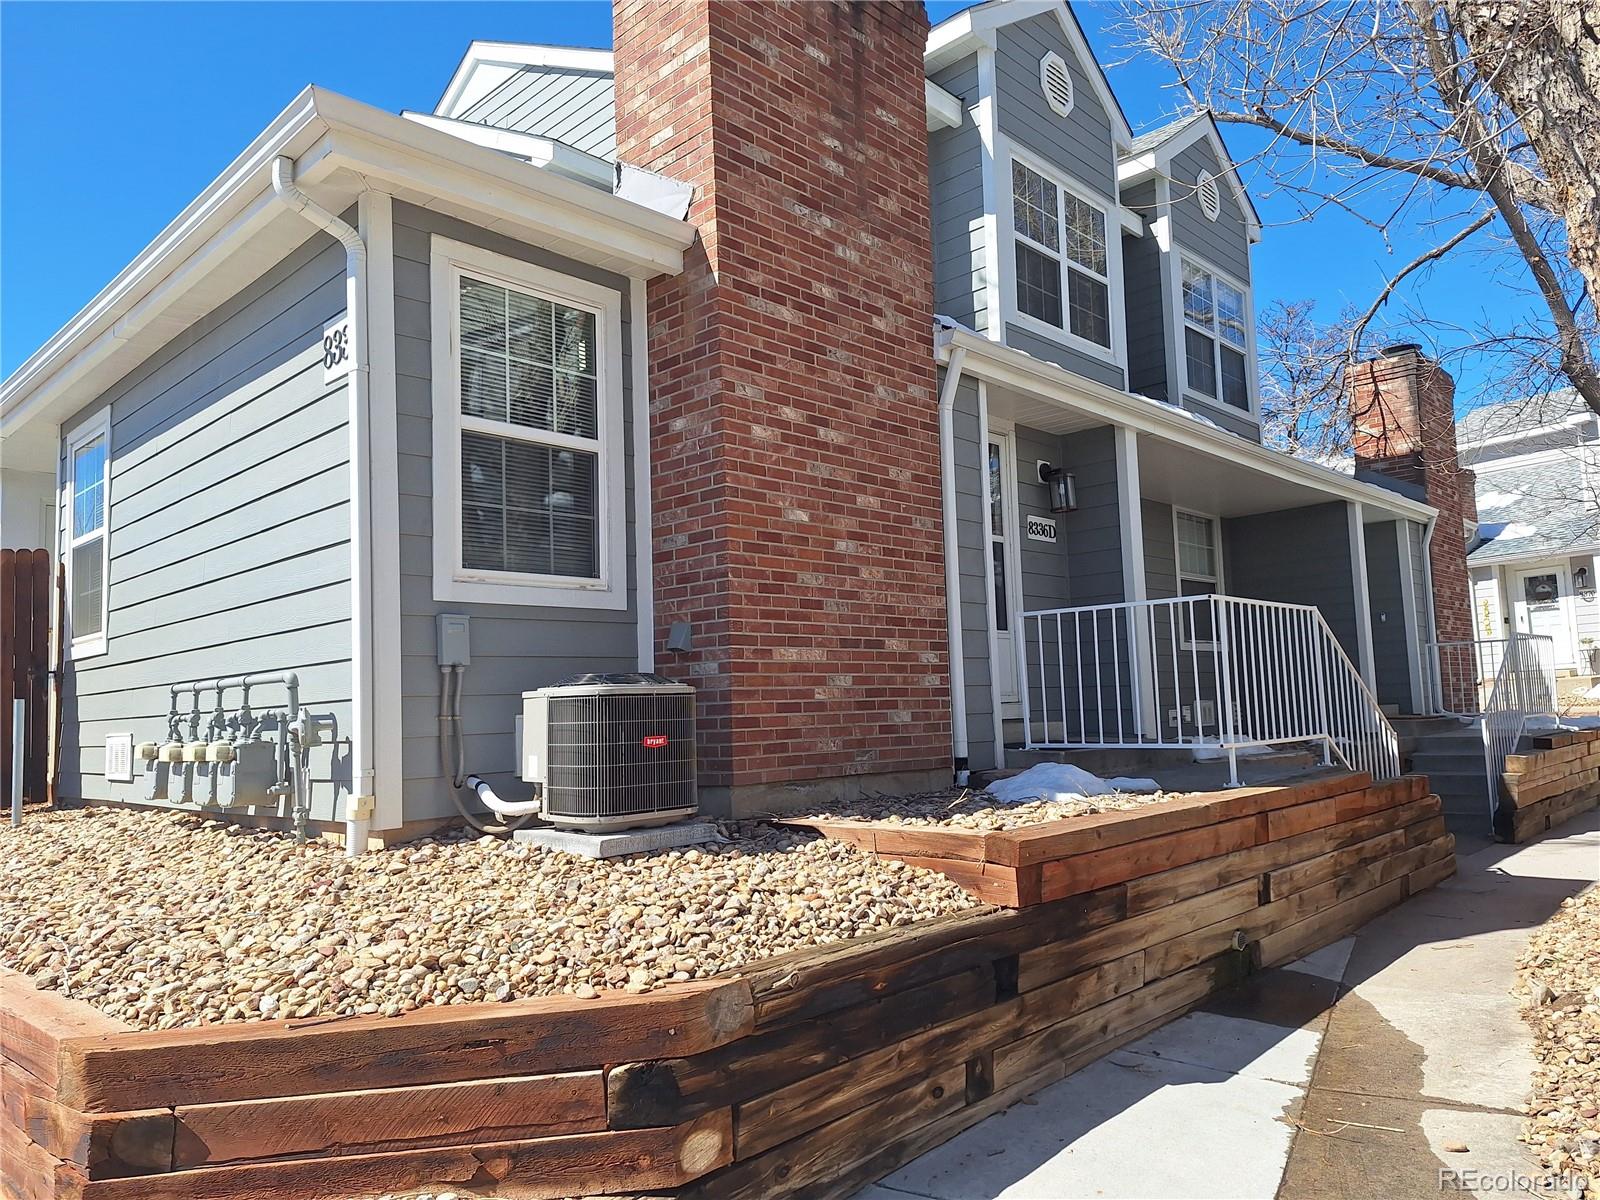 8336 W 87th Drive D, Arvada  MLS: 2650336 Beds: 2 Baths: 2 Price: $394,500